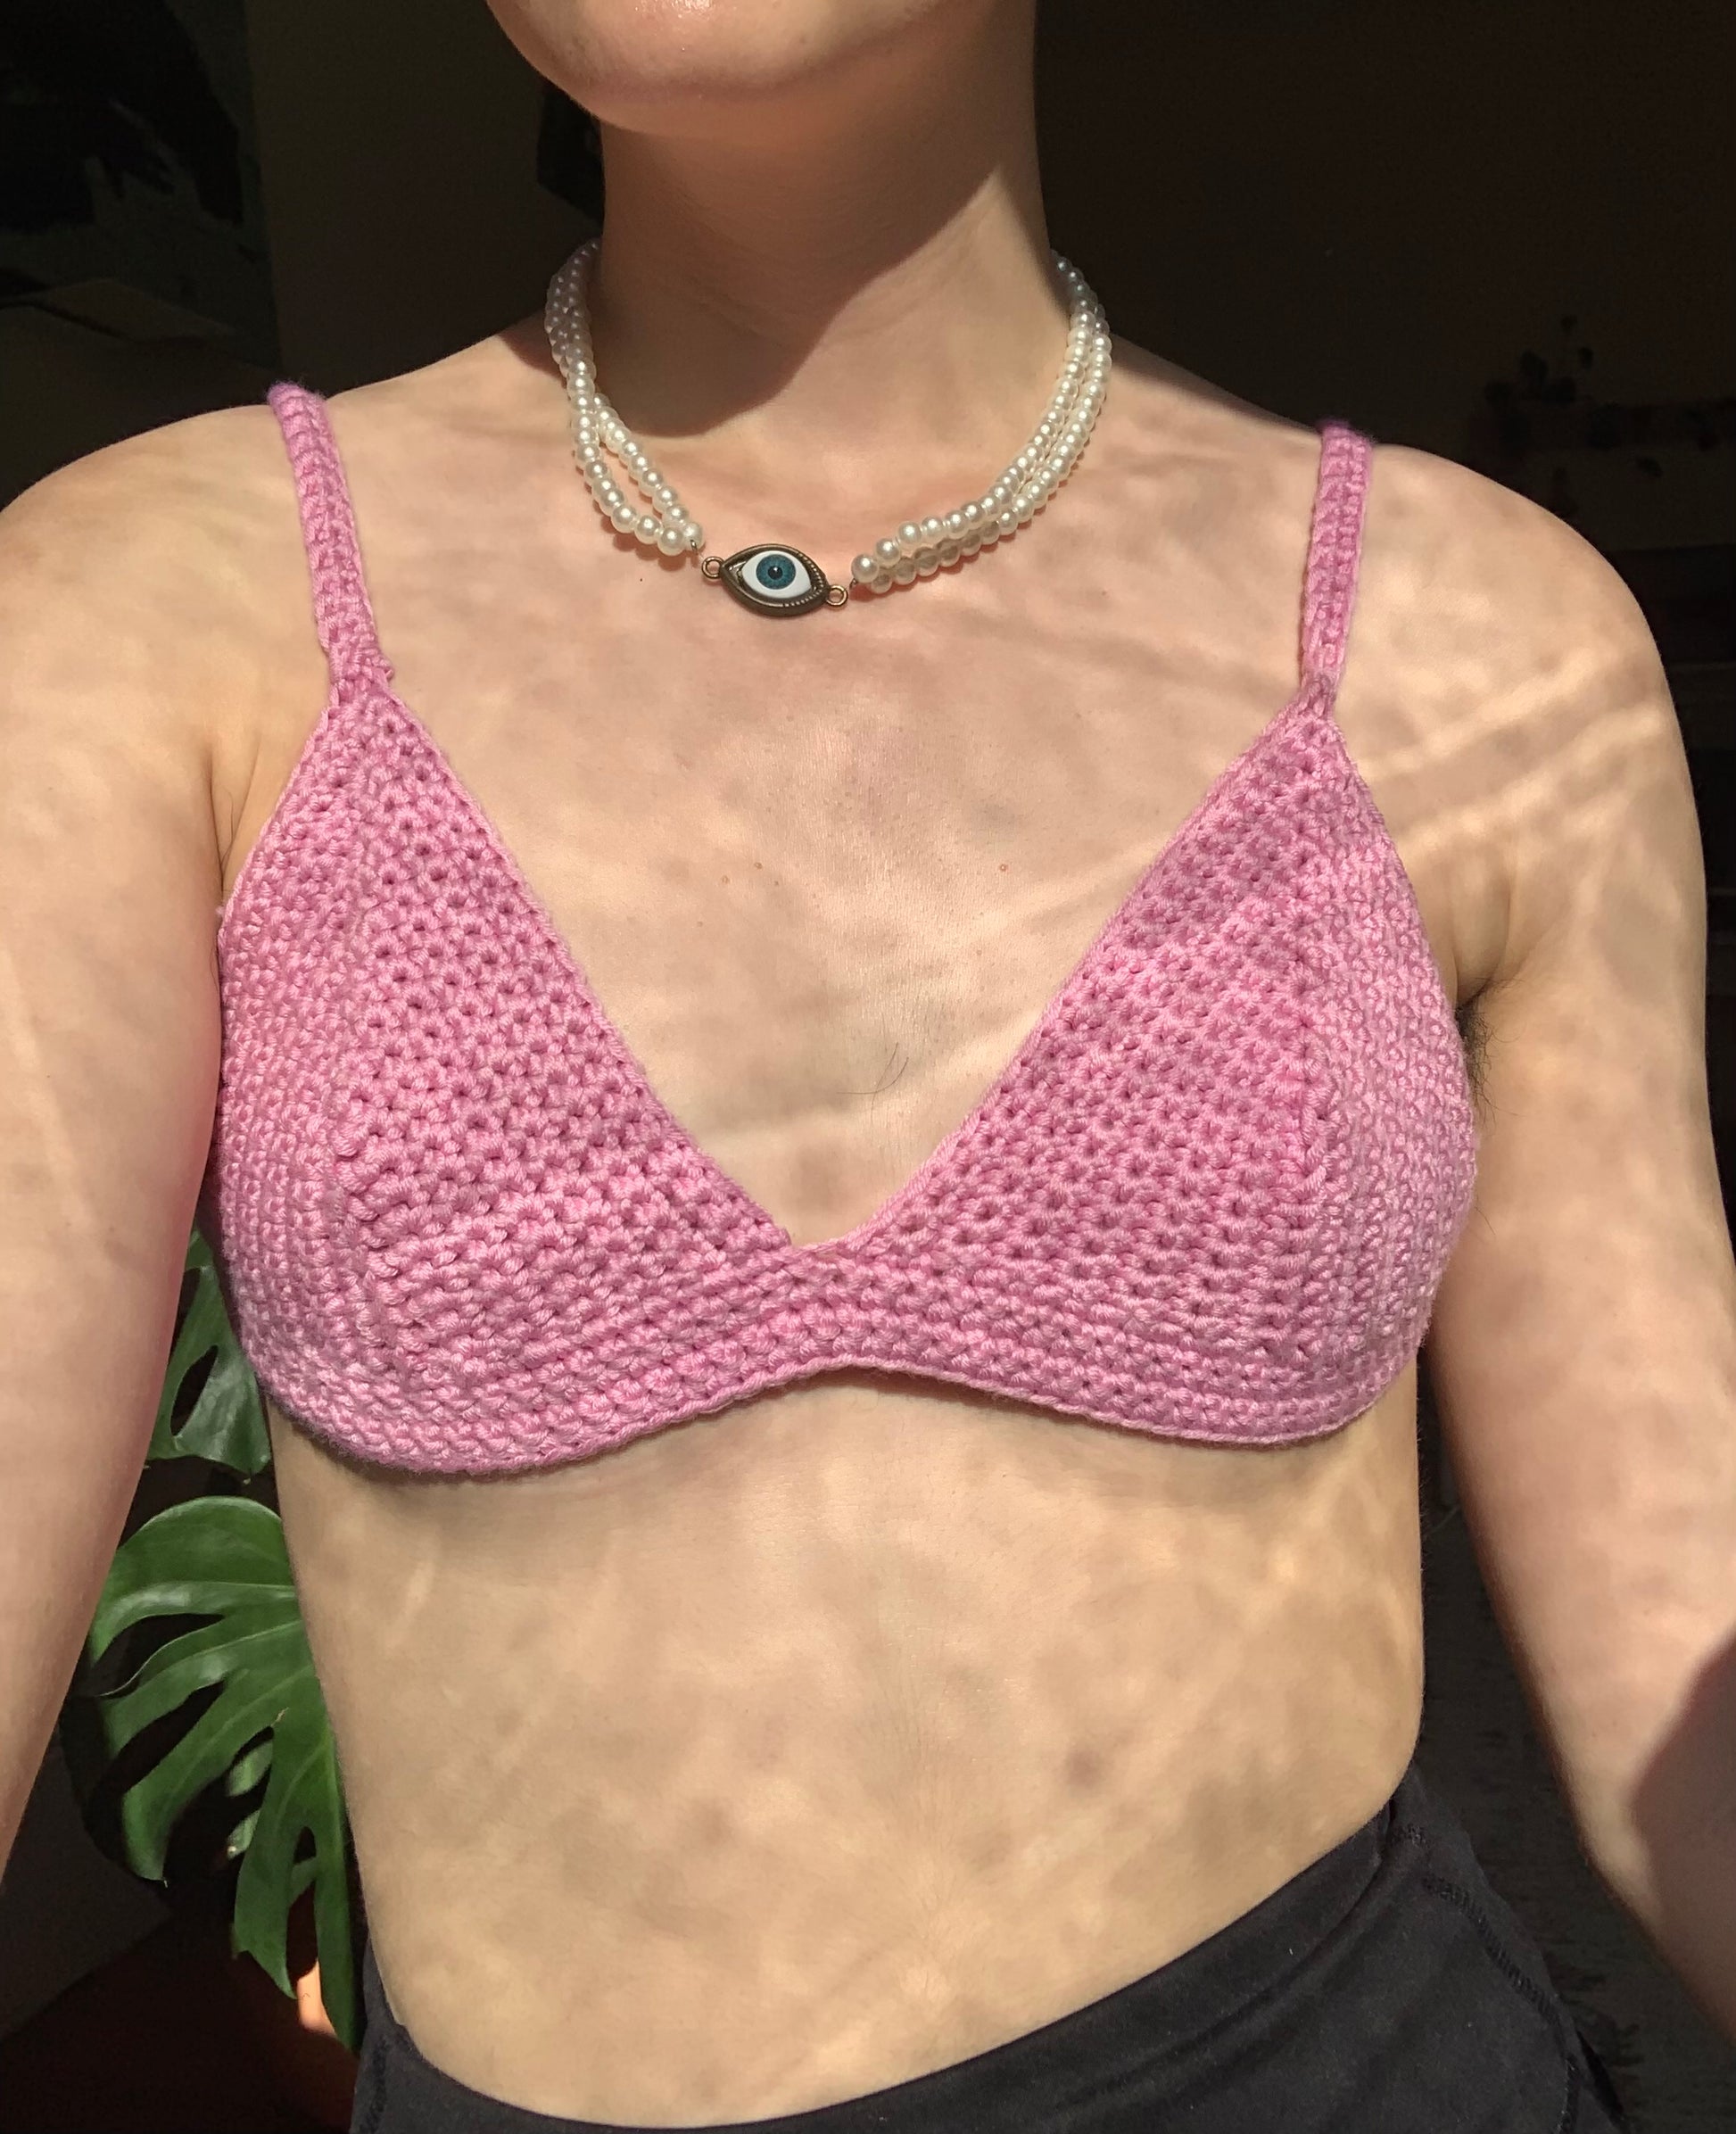 Does Wearing Crochet Bralette Cause Sagging of Boobs? - Sass Obsessed